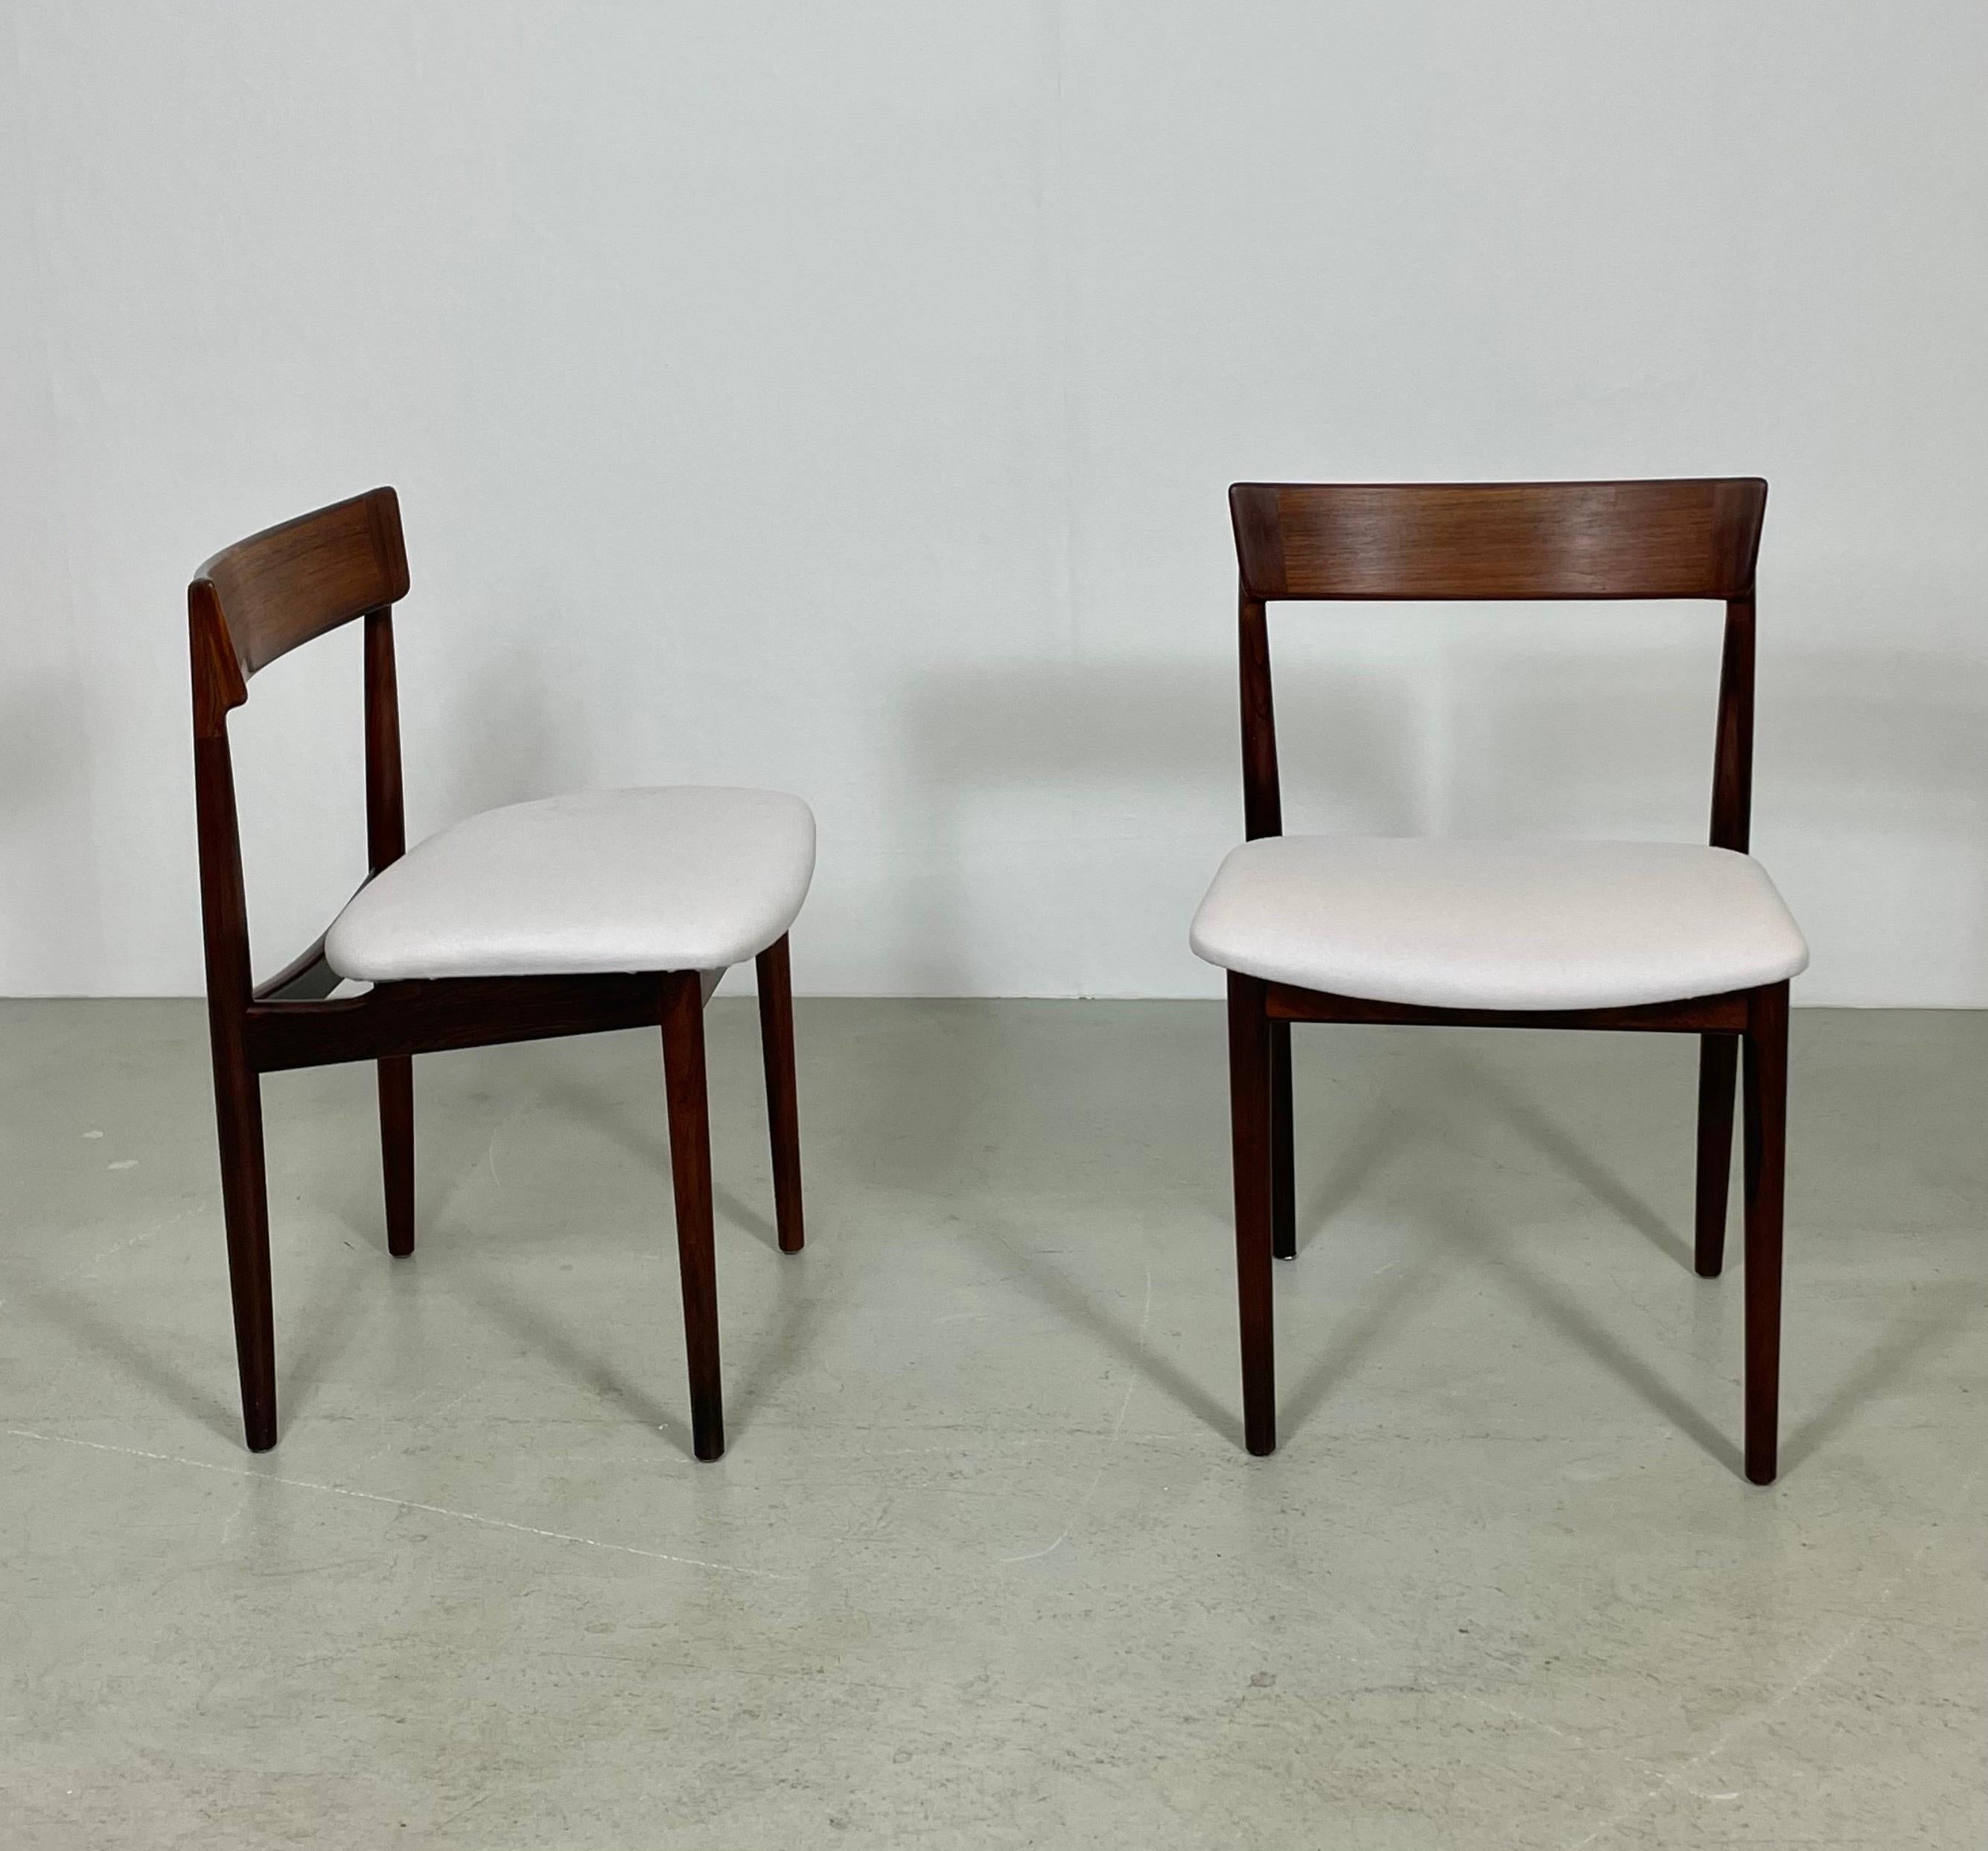 4x Danish Dining Chairs model 39 by Henry Rosengren 1960  For Sale 12